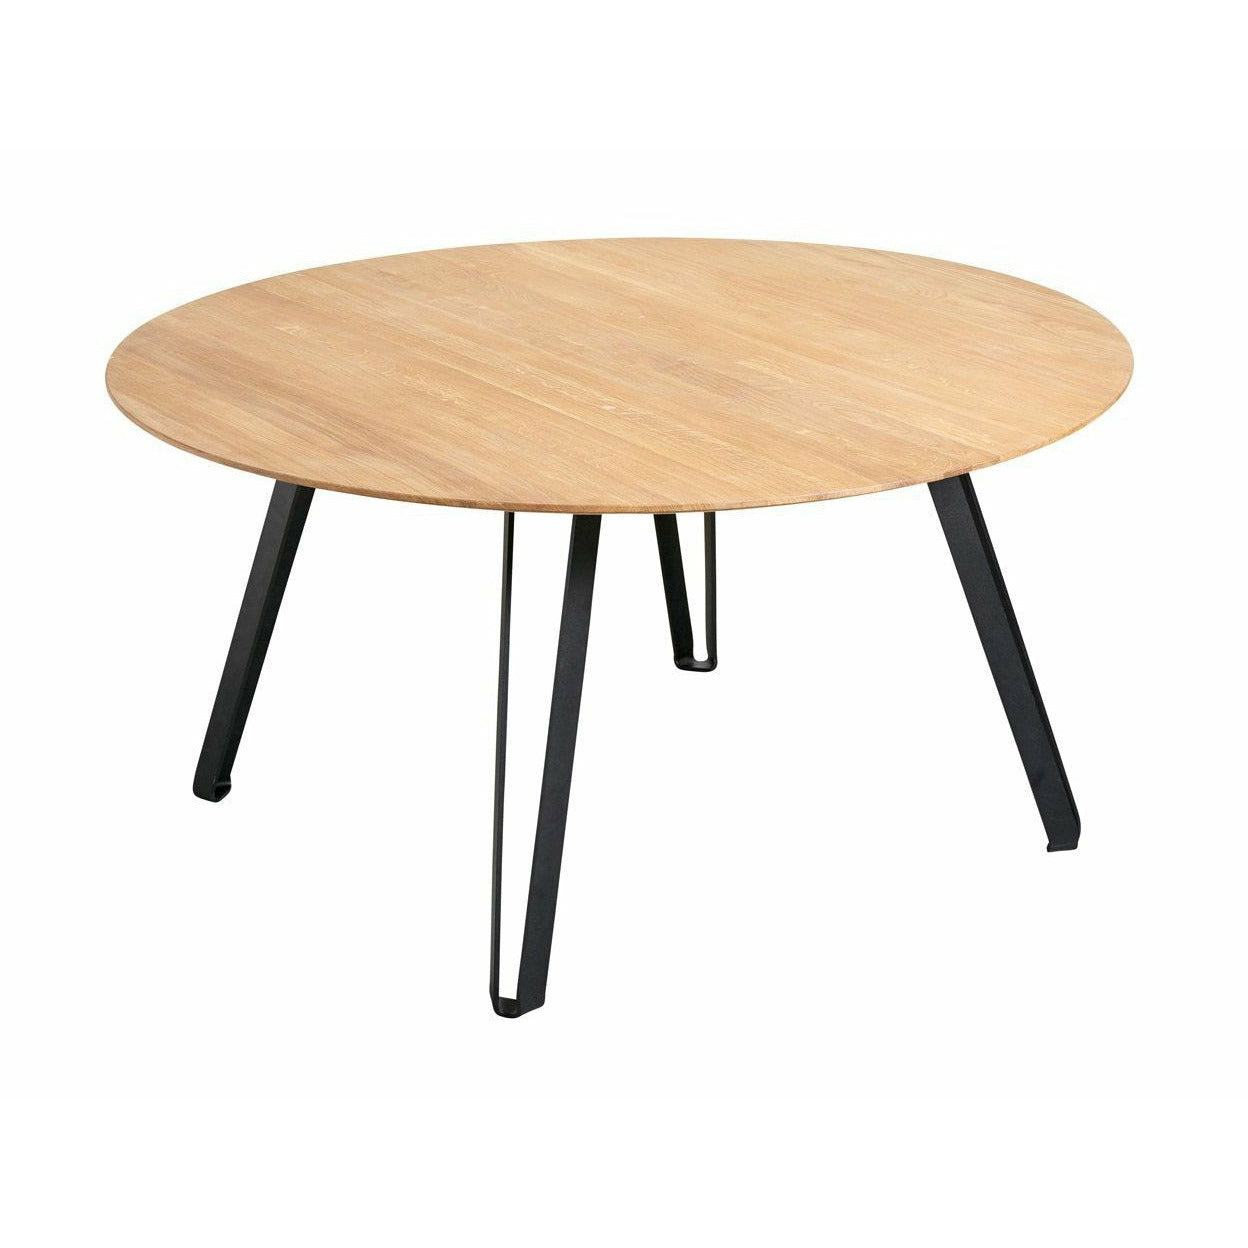 Muubs Space Jading Table Natural, Ø120 cm